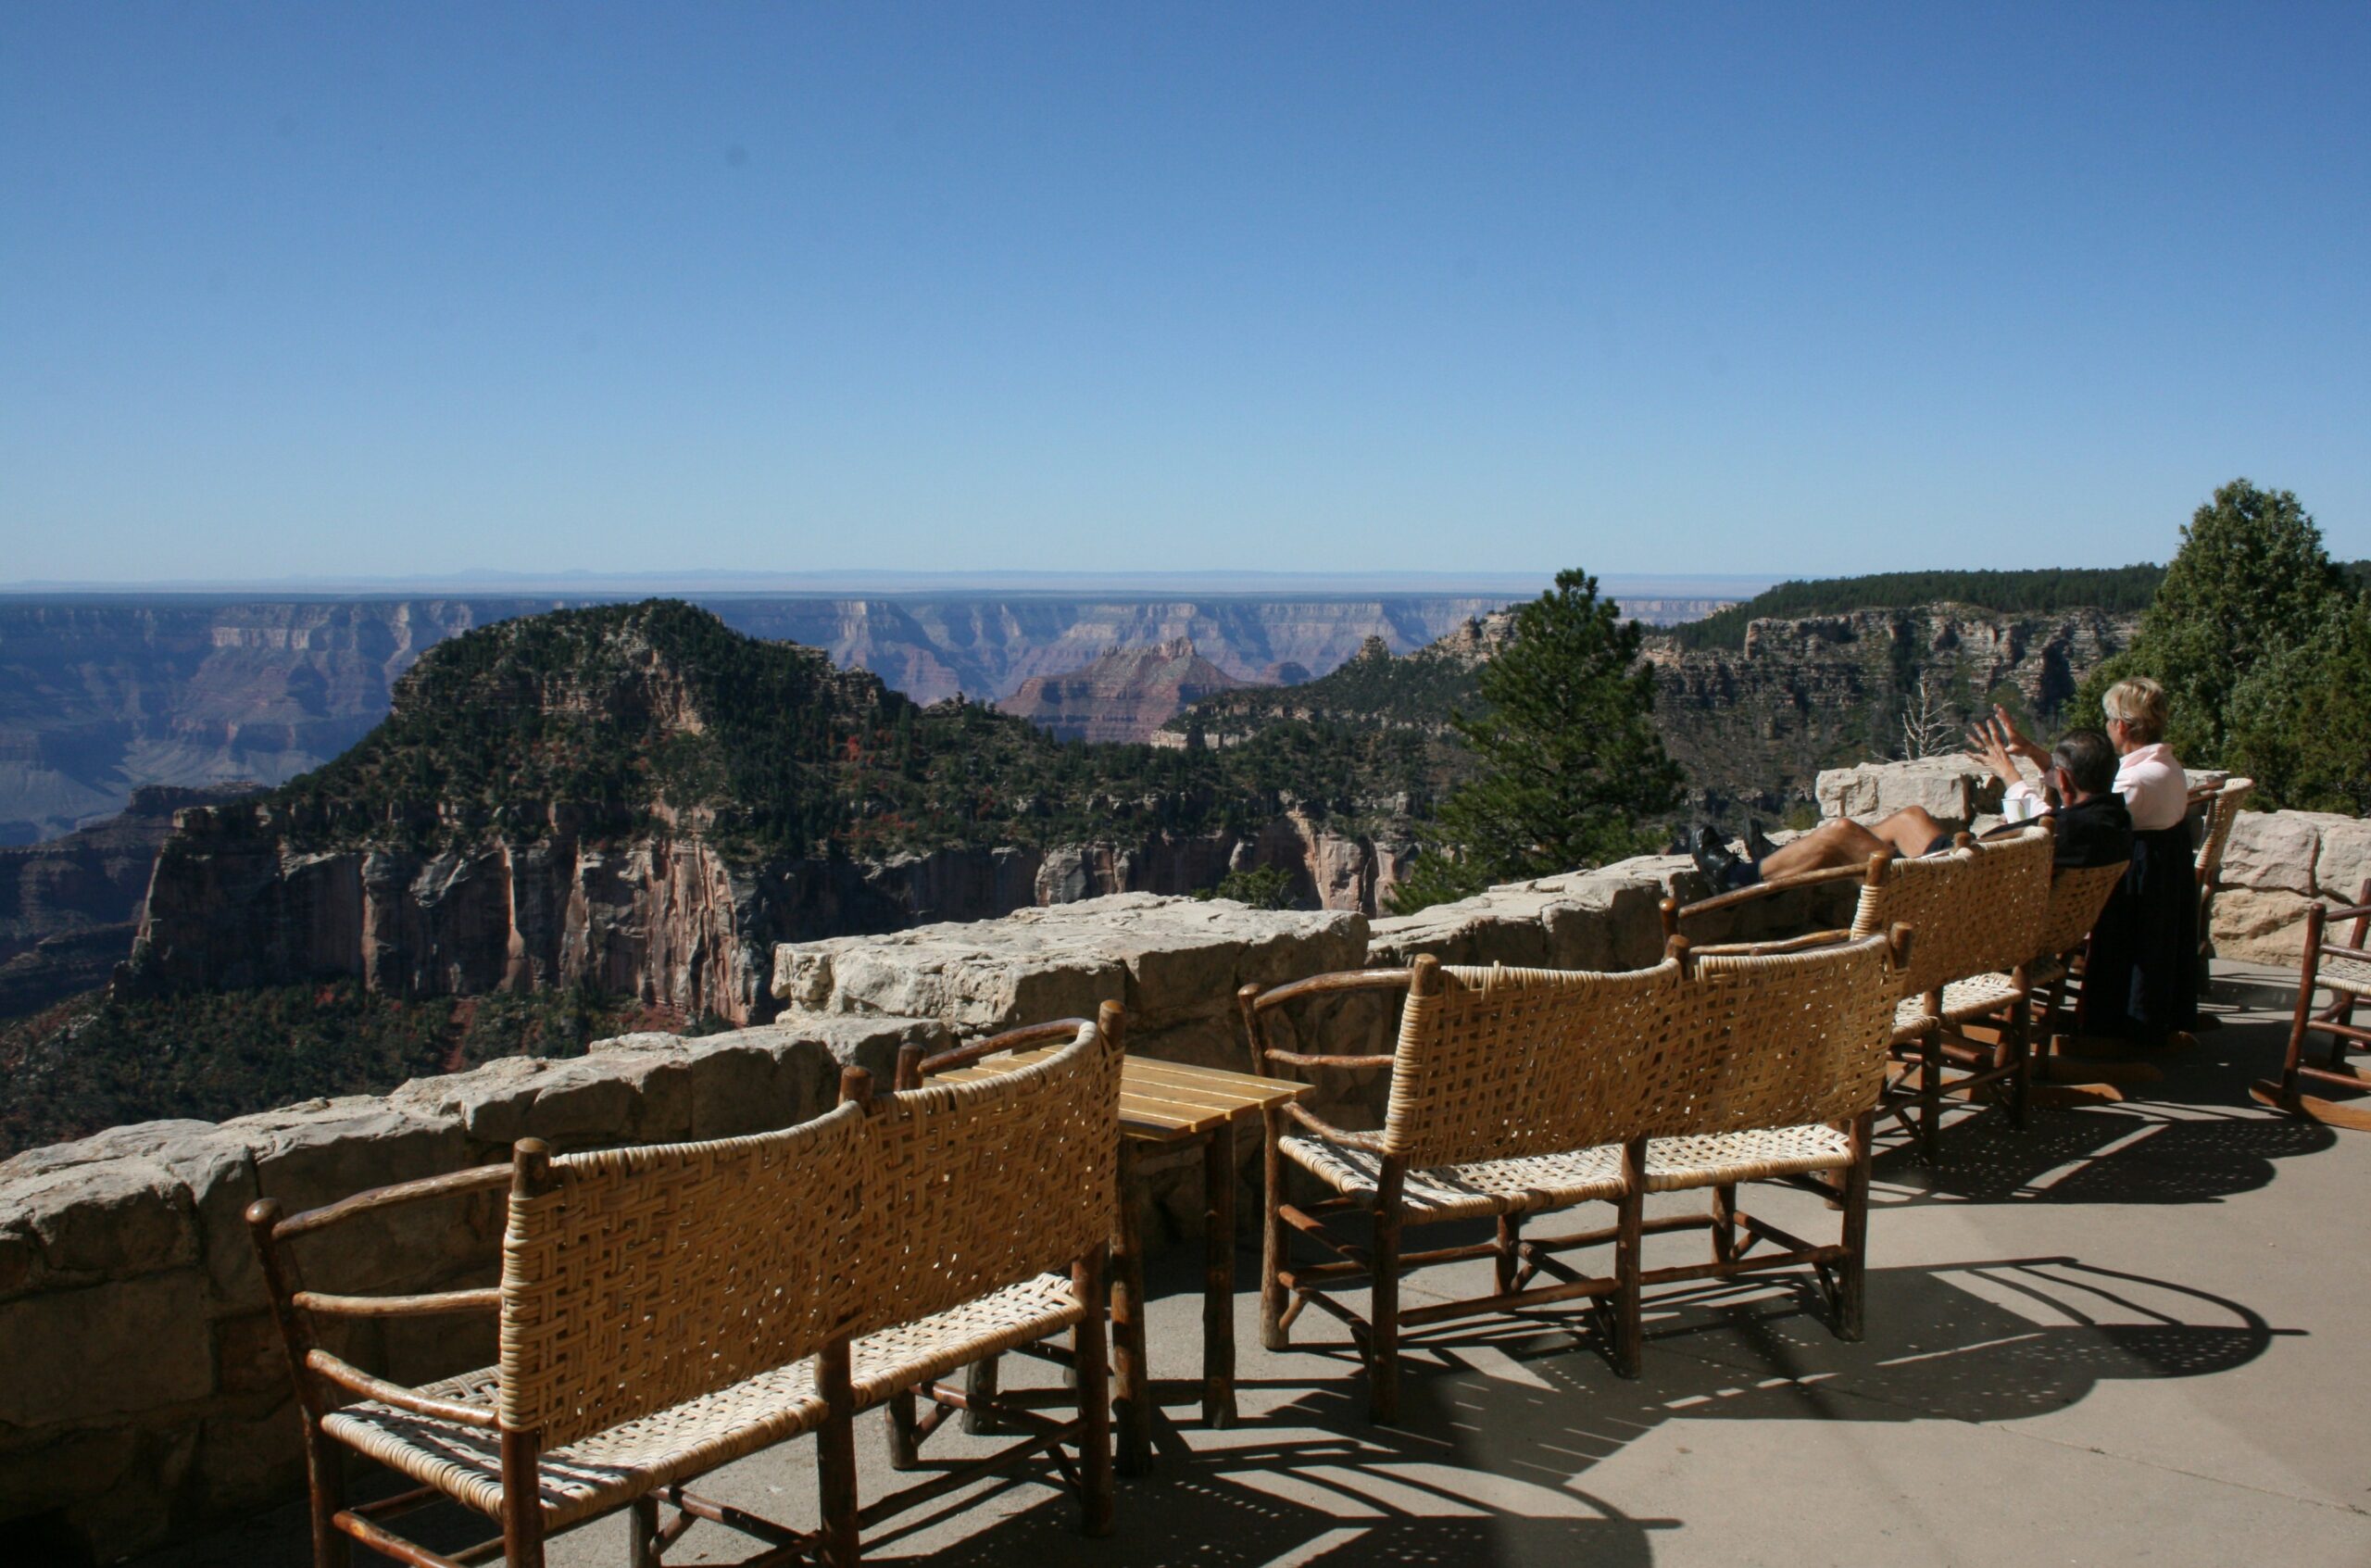 Tourists enjoy the view of the Grand Canyon on the patio at the North Rim Lodge.